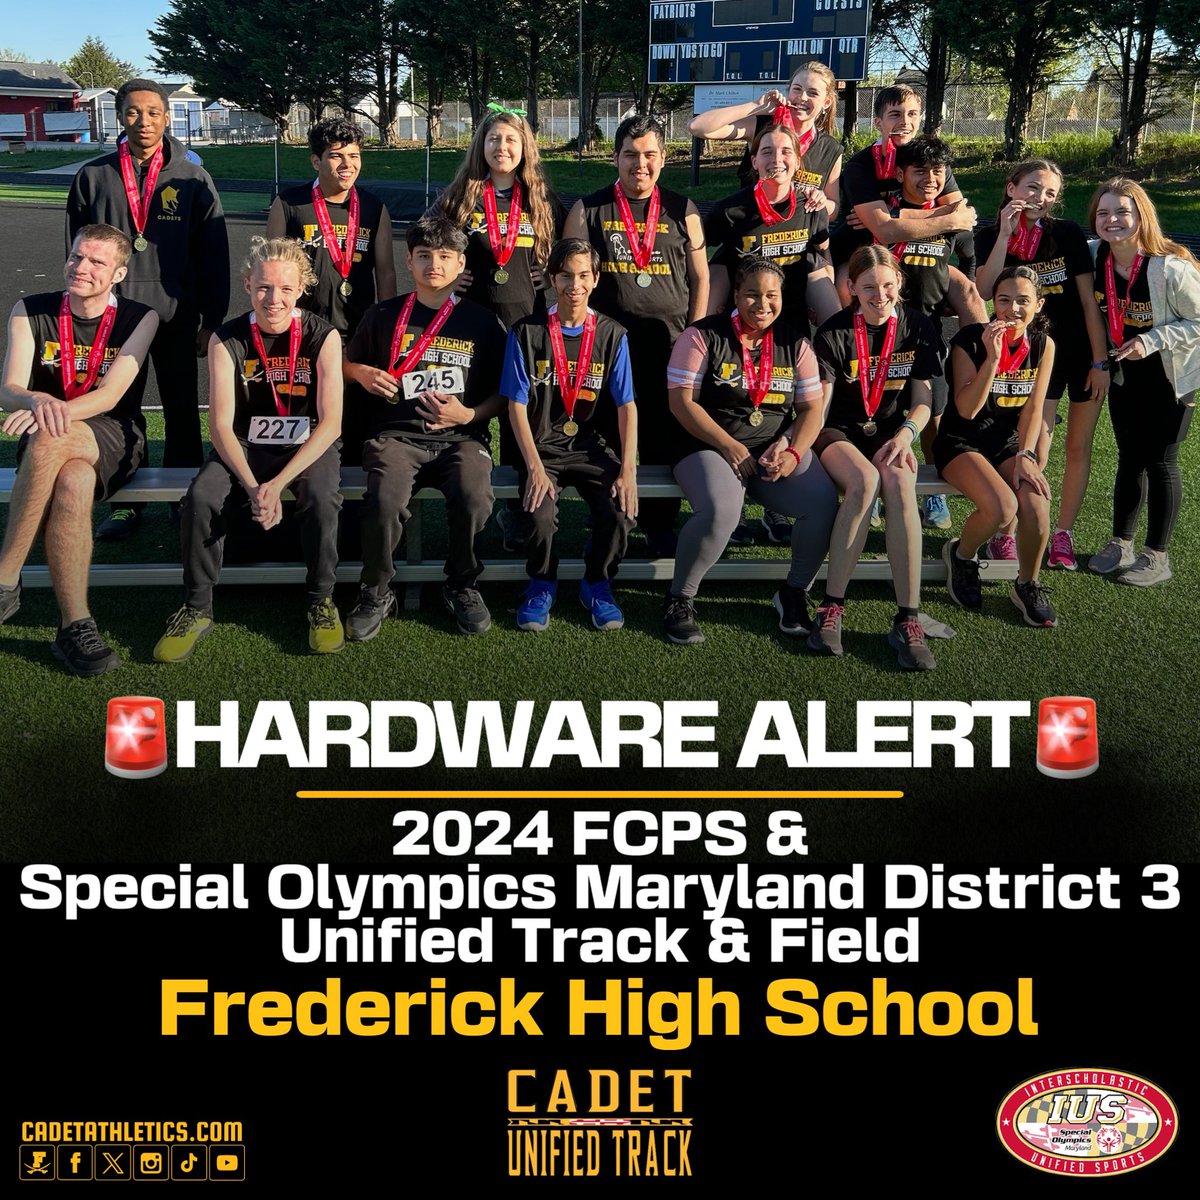 ⚡️Cadetathletics.com Breaking News 
🥇🚨HARDWARE ALERT🚨🥇

Frederick High Schools Unified Track Team wins gold at today’s 2024 @FCPSMaryland & @SpOlympicsMD District 3 Unified Track & Field Championships!

⚔️ | #BigFred | ⬛️🟨 | #ProtectTheParkway